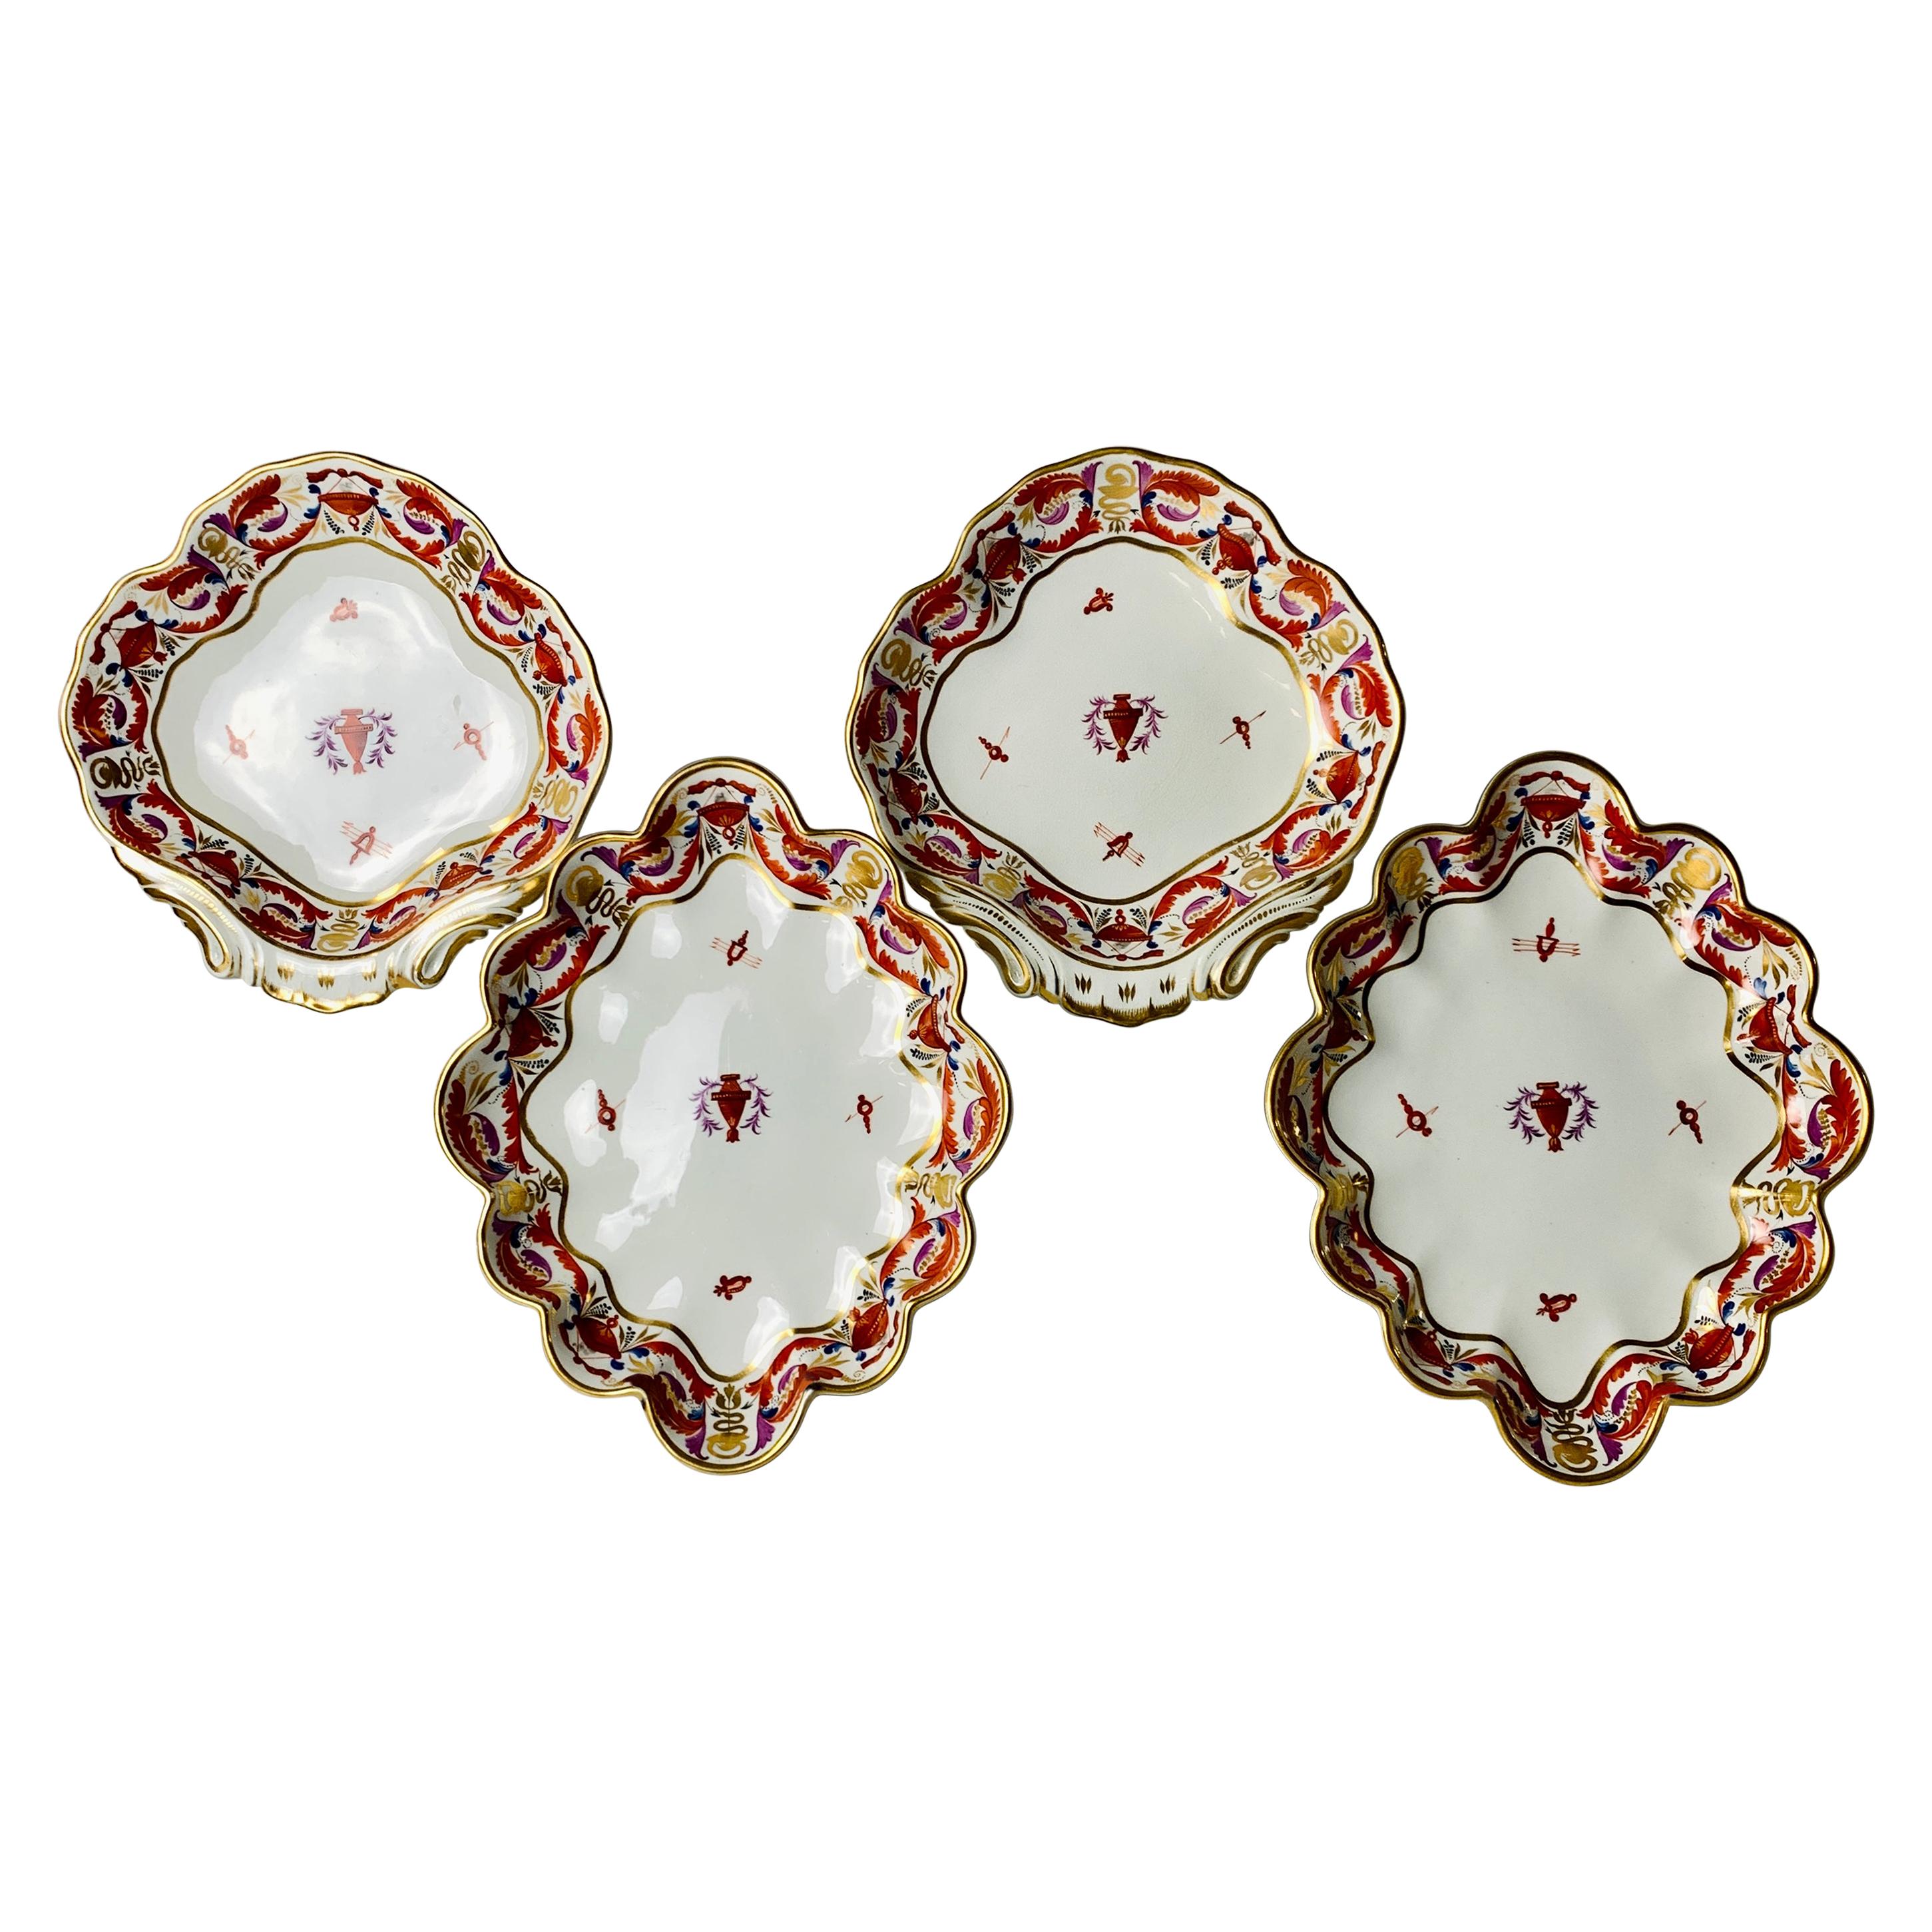 Two Pairs of Derby Porcelain Shaped Dishes Hand-Painted England, Circa 1810